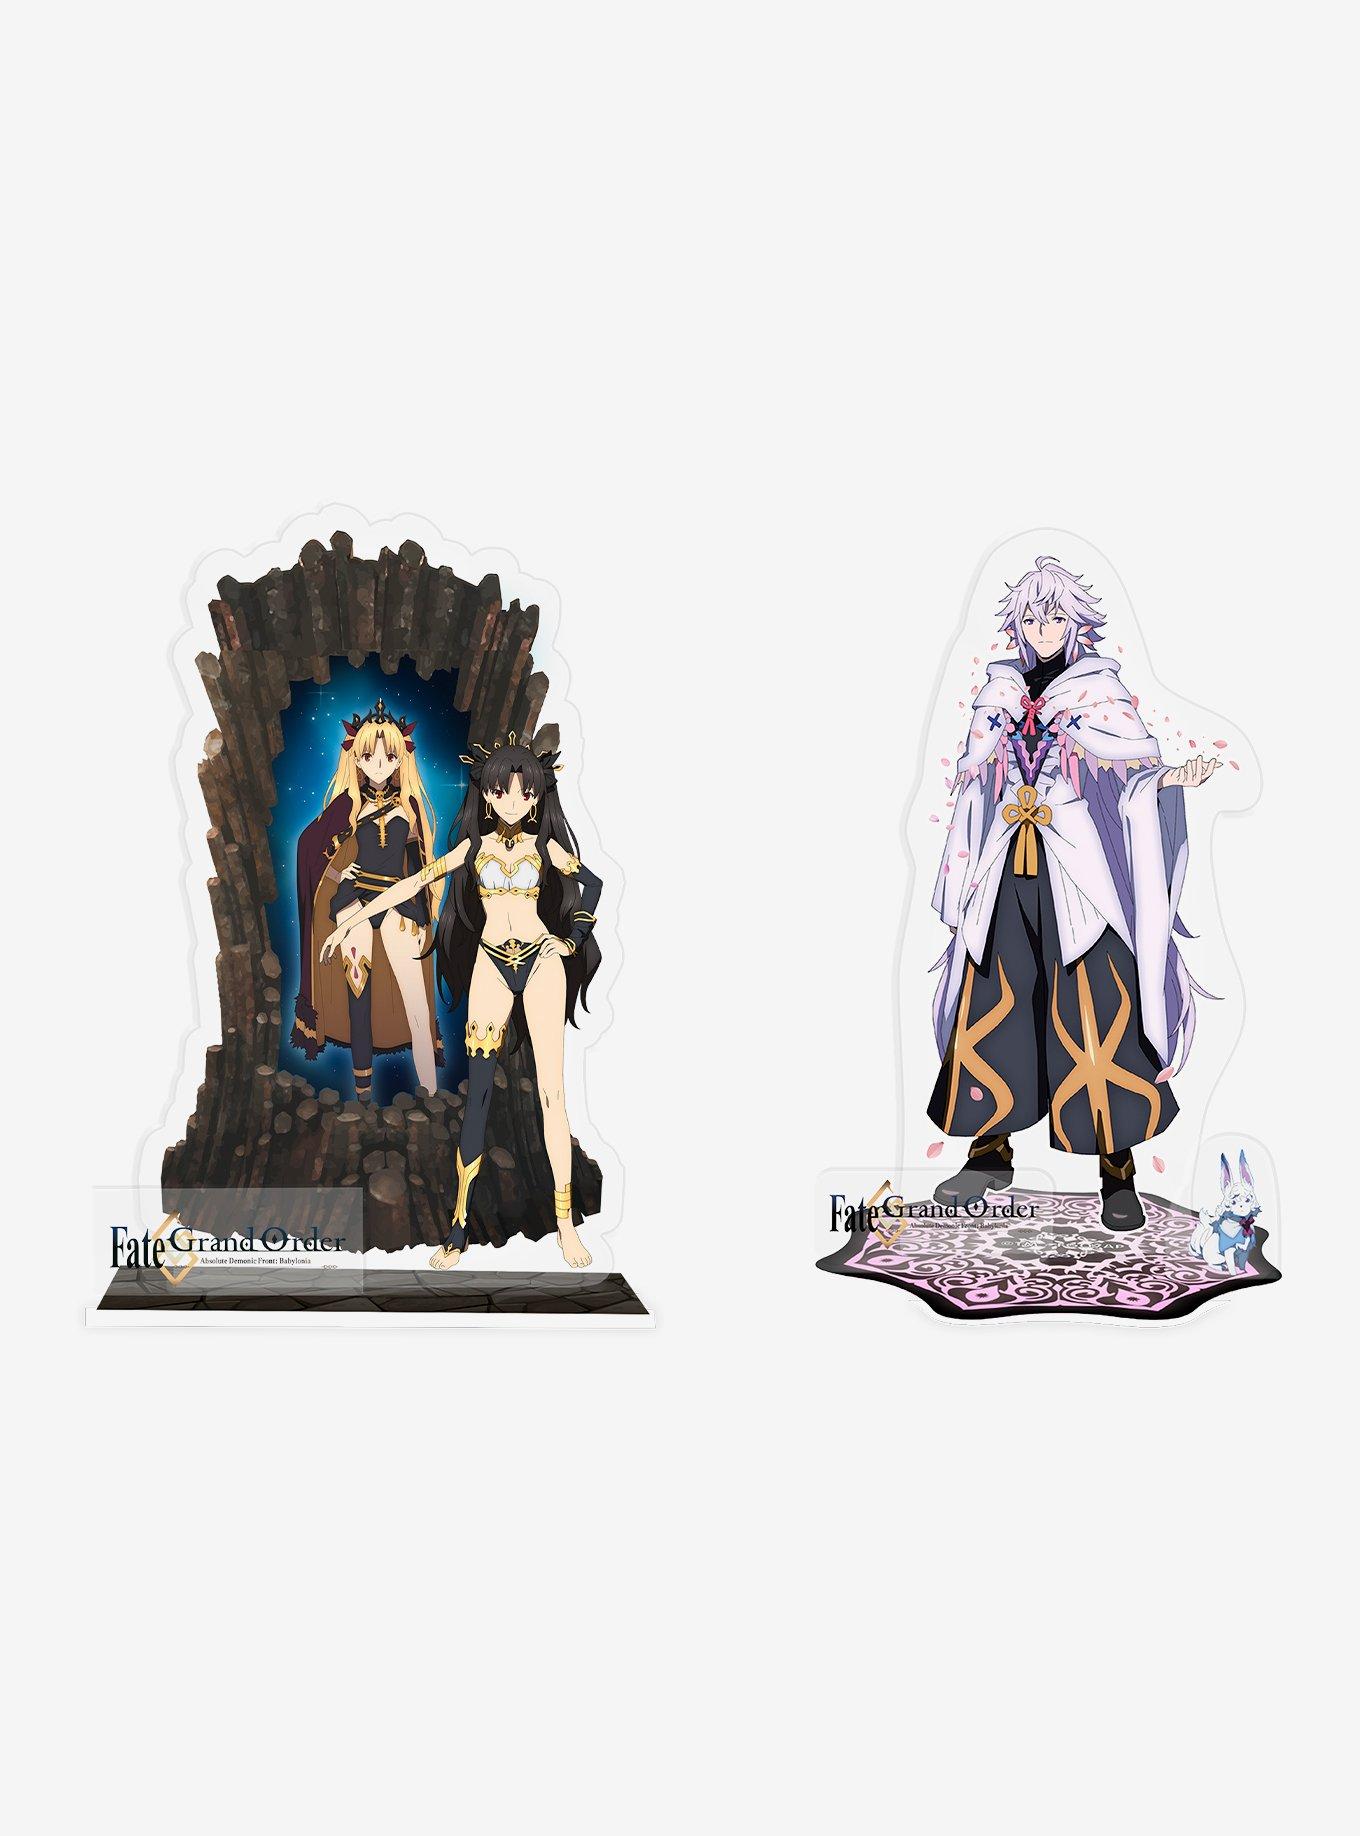 Record of Ragnarok Acrylic Stand [Thor] (Anime Toy) Hi-Res image list